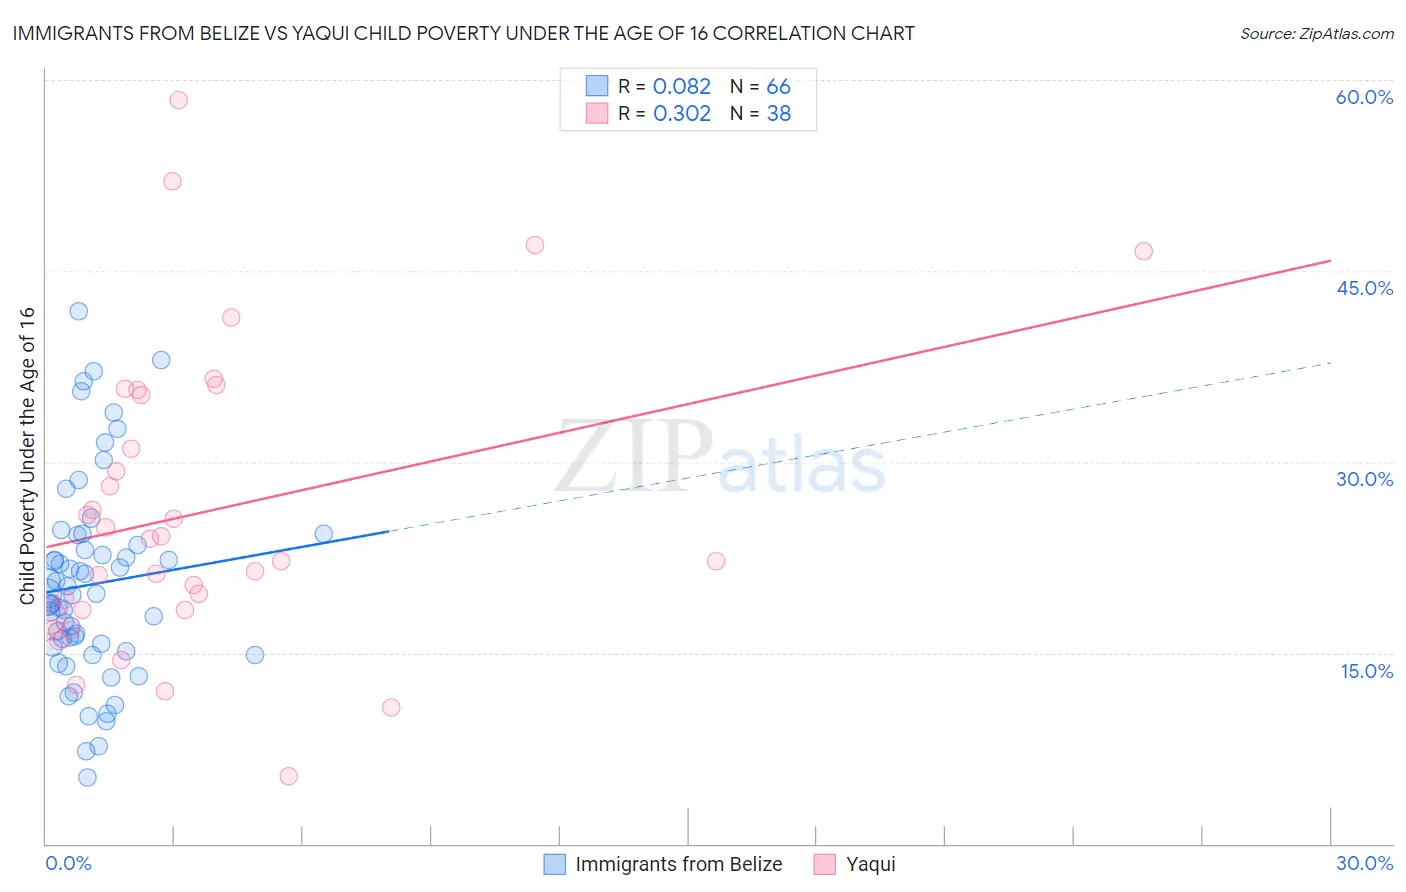 Immigrants from Belize vs Yaqui Child Poverty Under the Age of 16